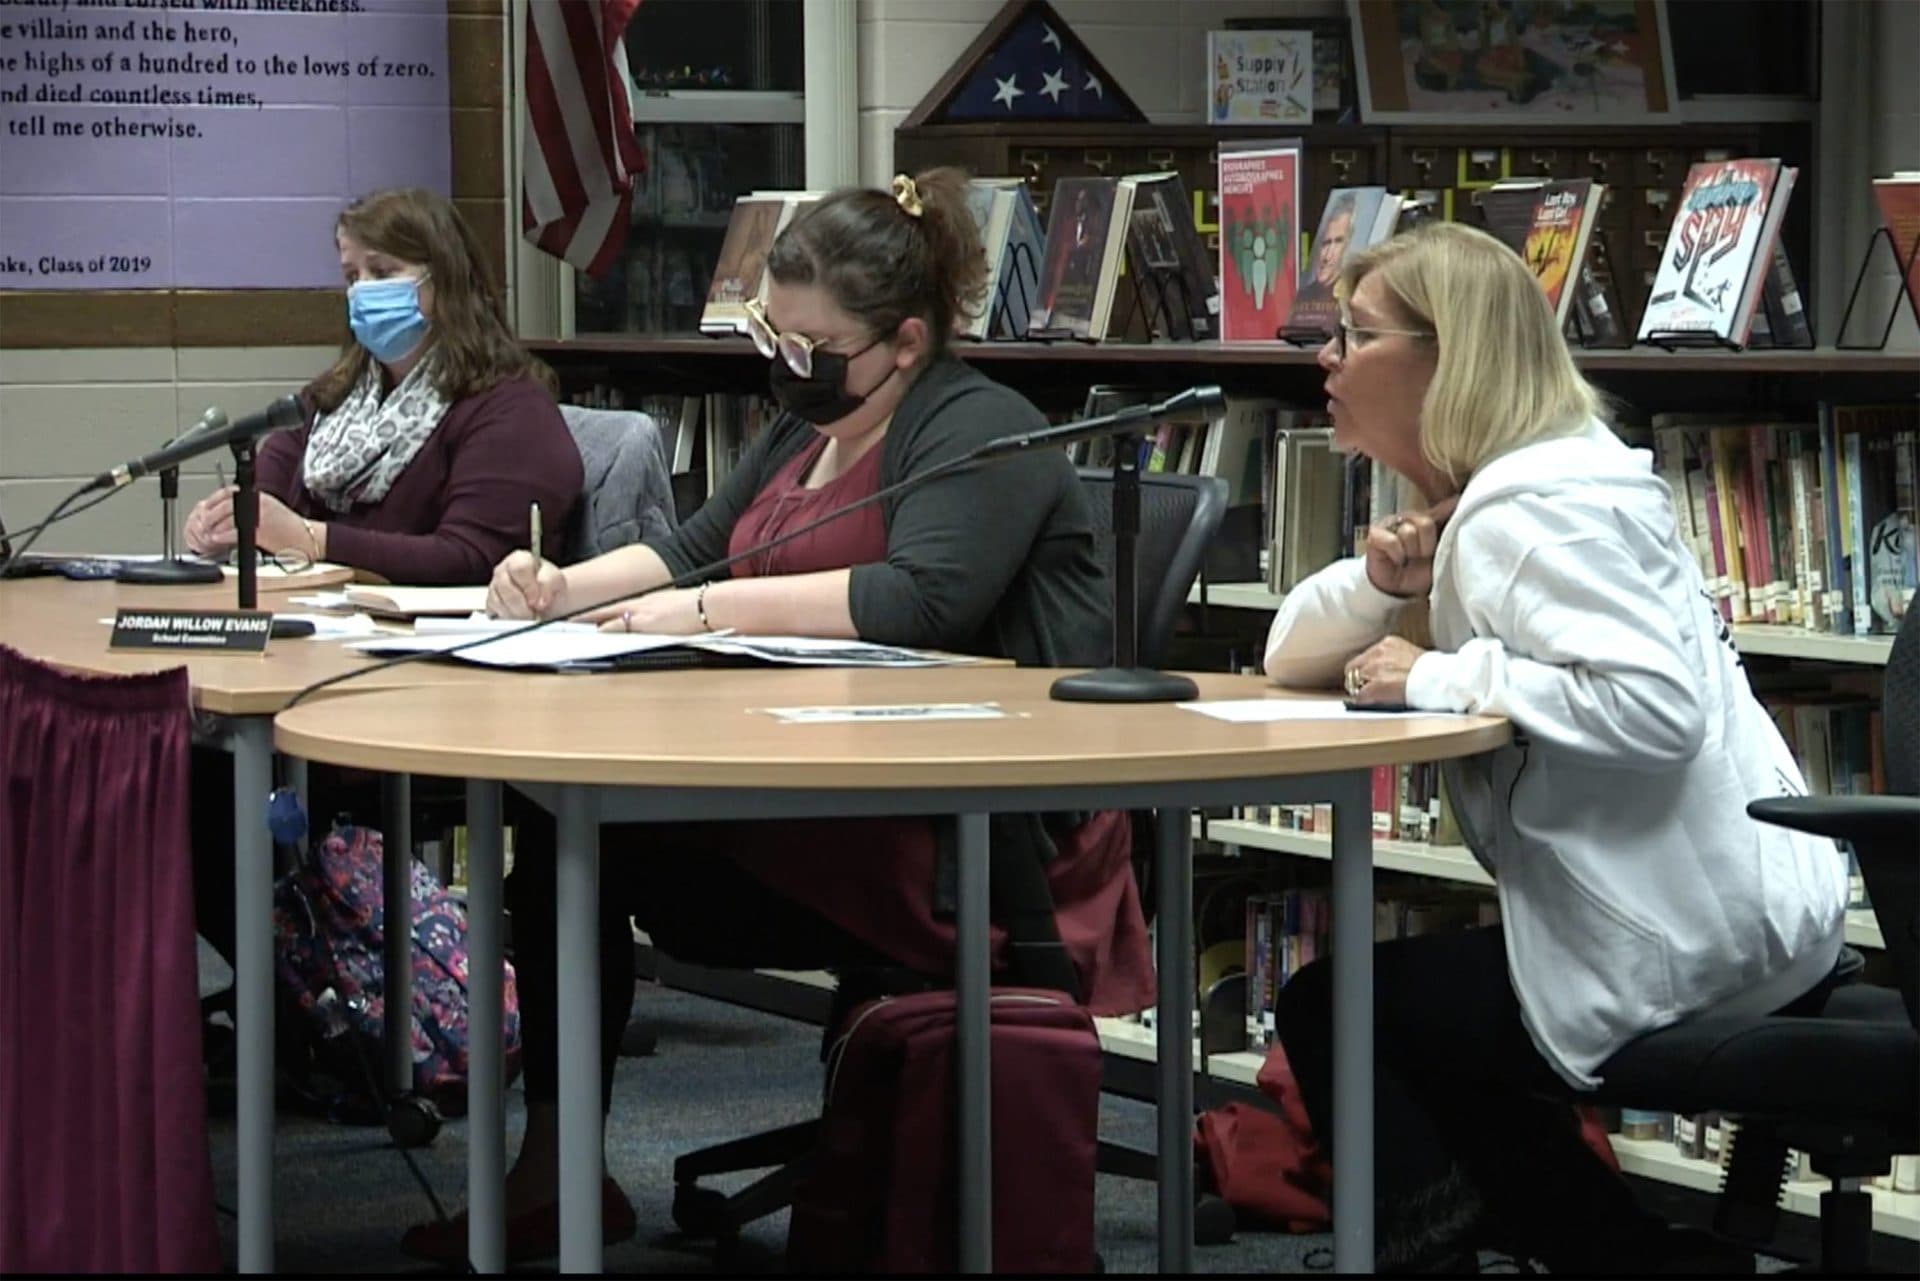 Carroll-Sue Rehm lives in Florida but has grandchildren in the Dudley-Charlton School District. She's led the effort to recall all five sitting school committee members. (Screenshot: Dudley-Charlton School Committee meeting)